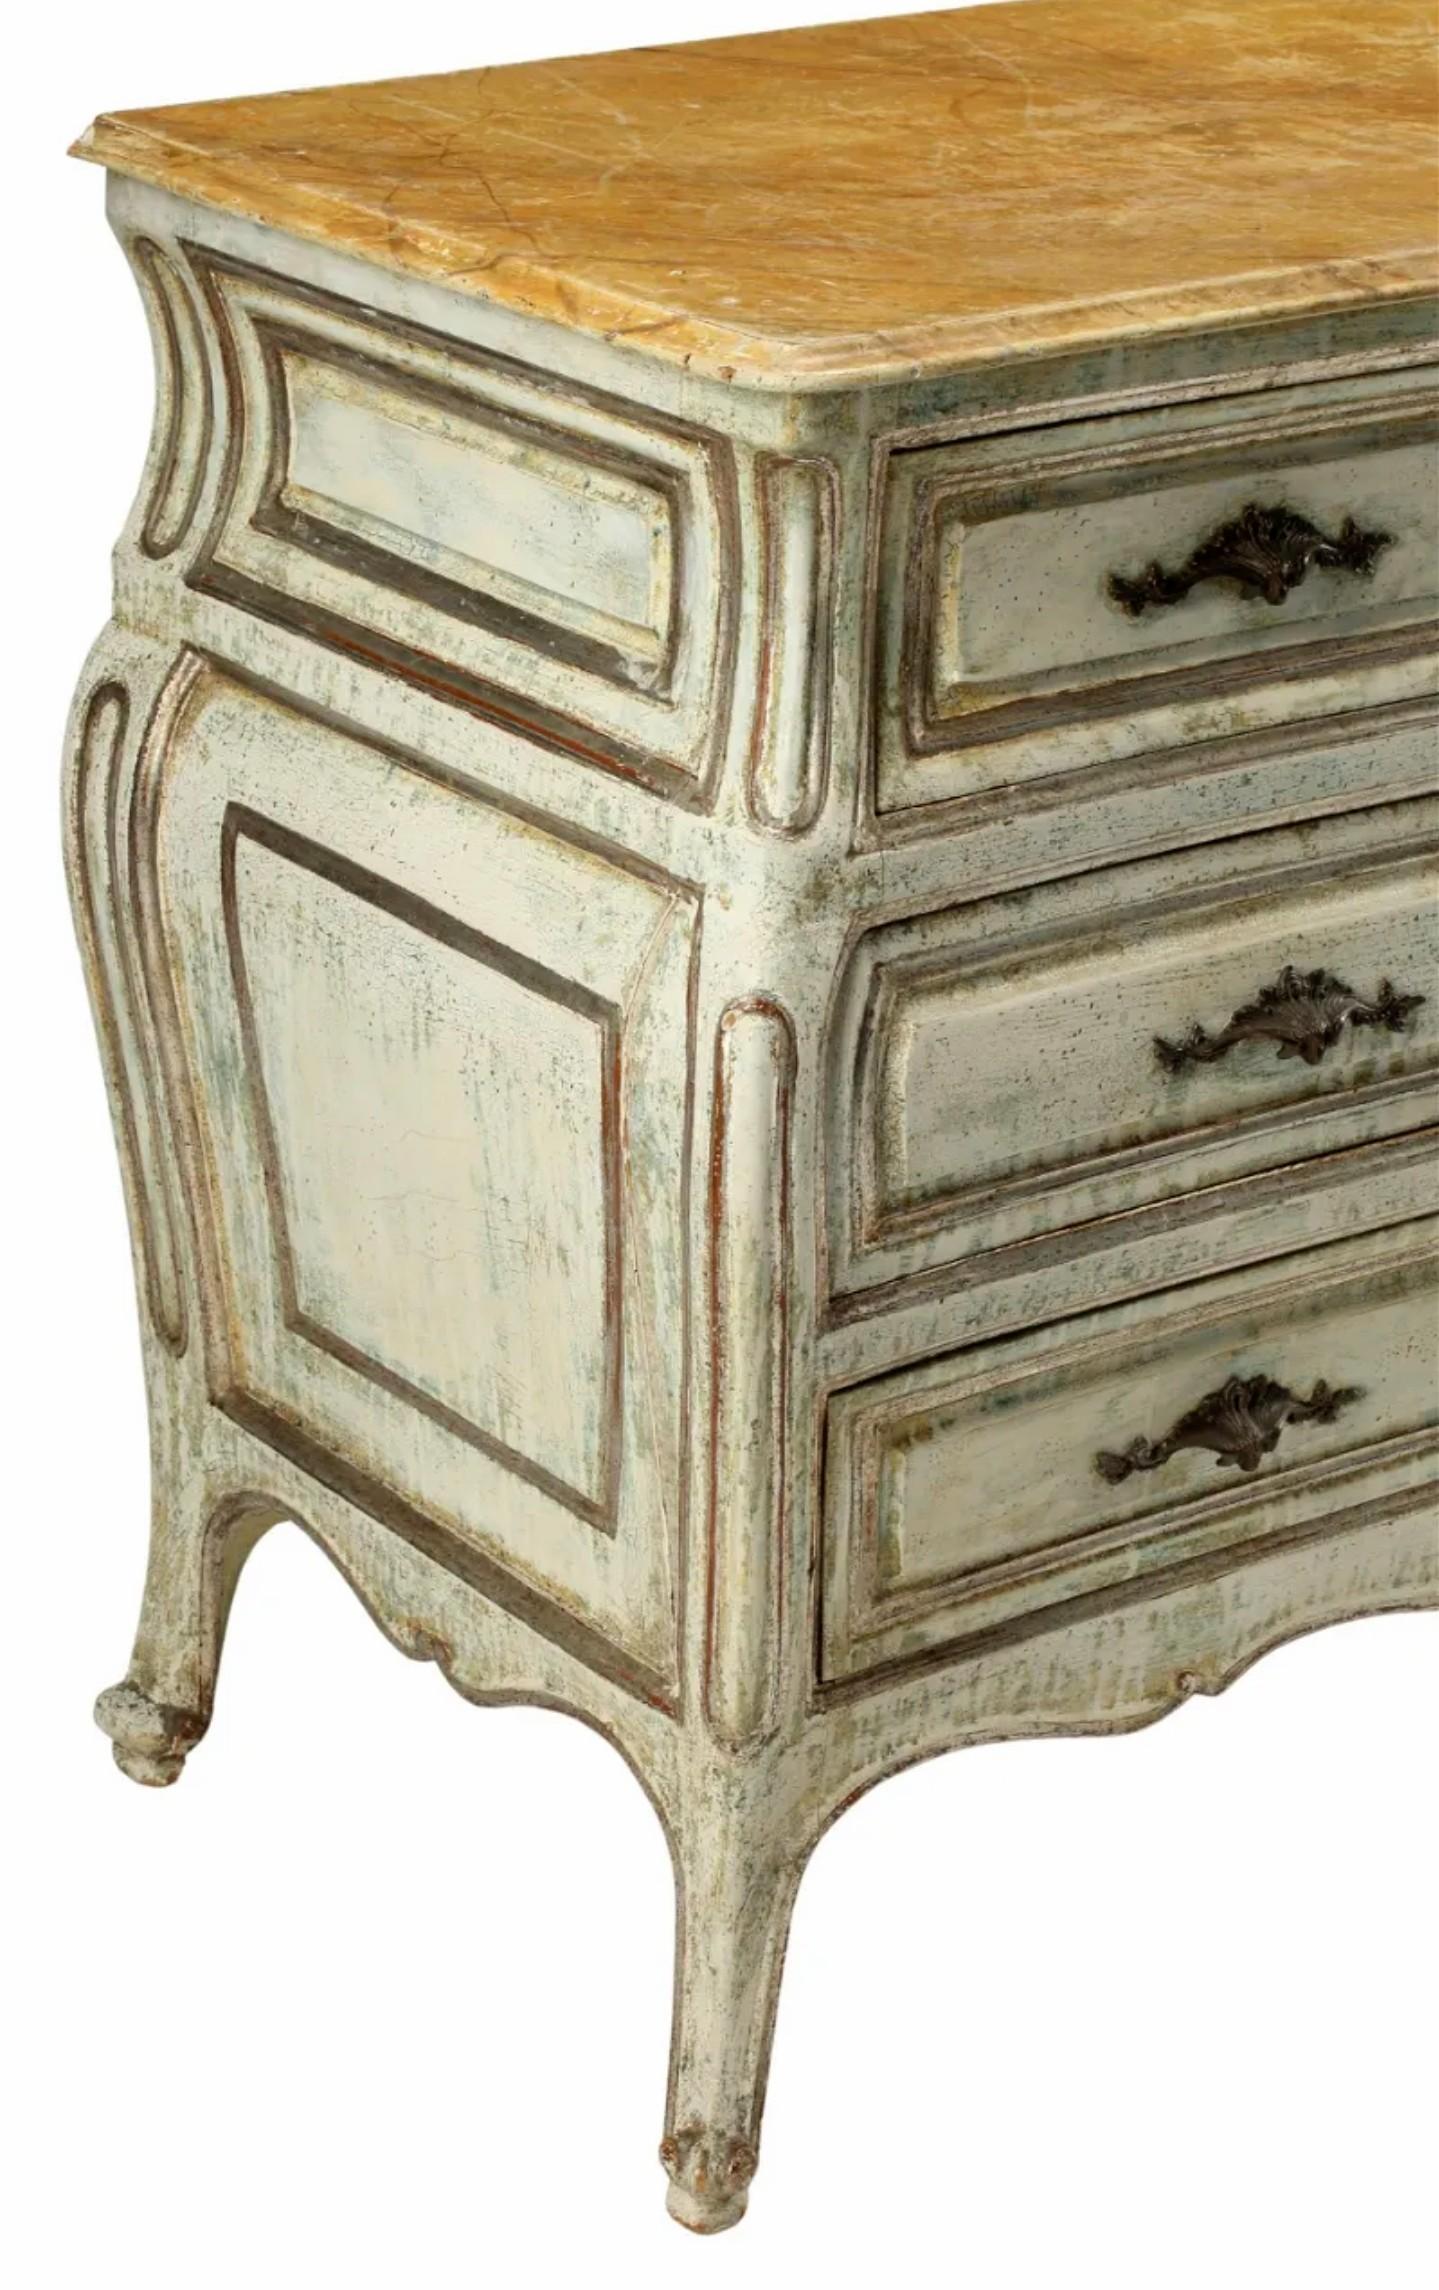 Vintage Louis XV Style Faux Marble Distressed Painted Bombe Chest of Drawers In Good Condition For Sale In Forney, TX